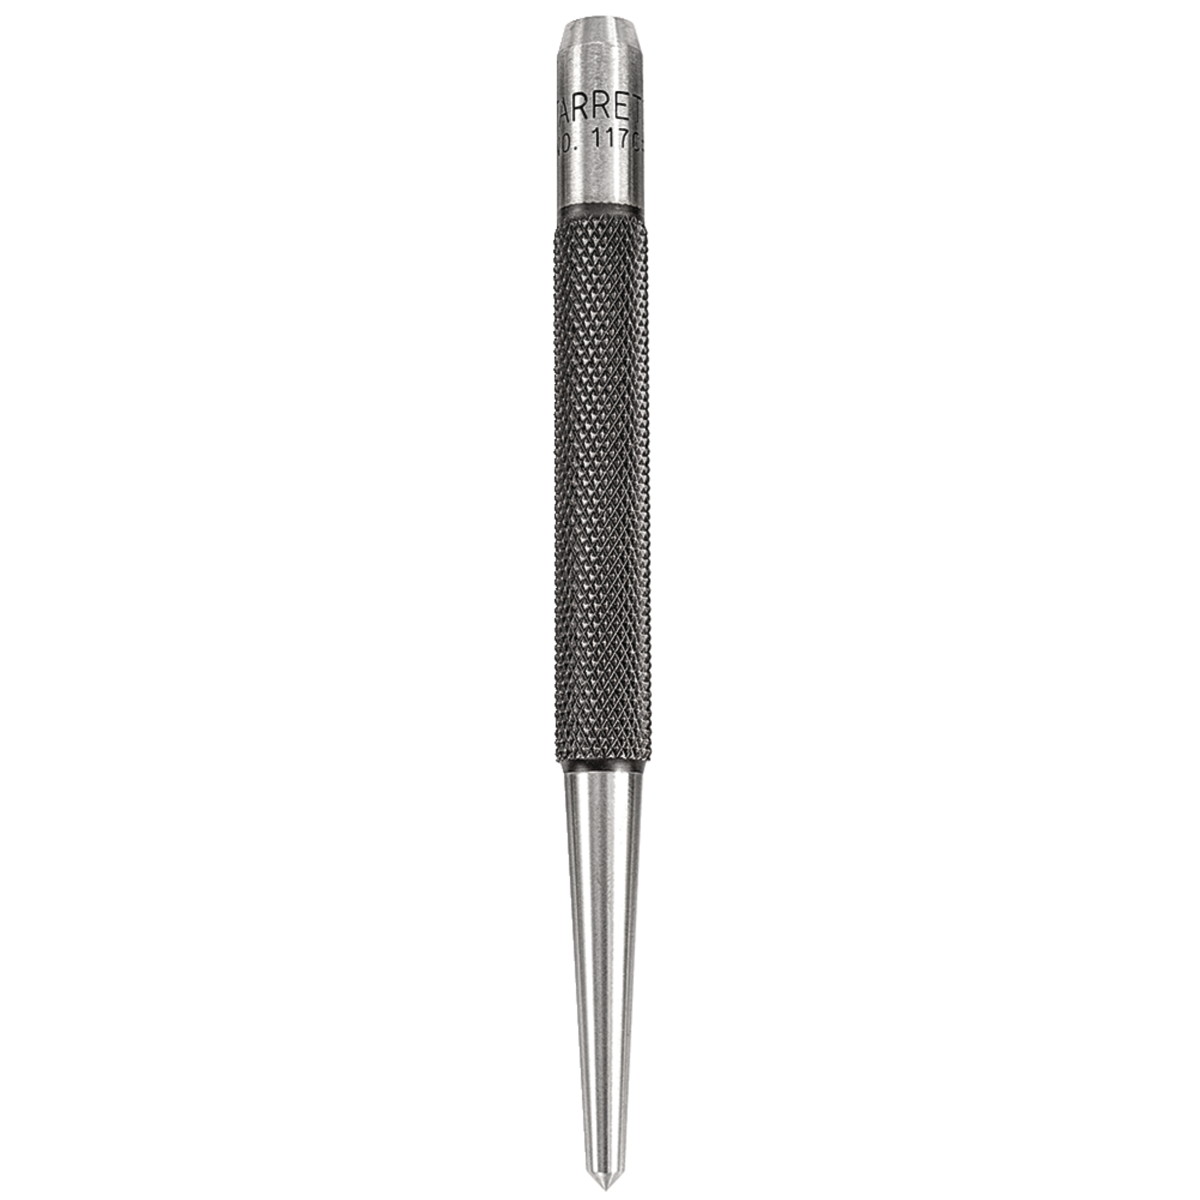 Picture of Starrett 117C 0.125 in. Point Diameter Center Punch with Round Shank